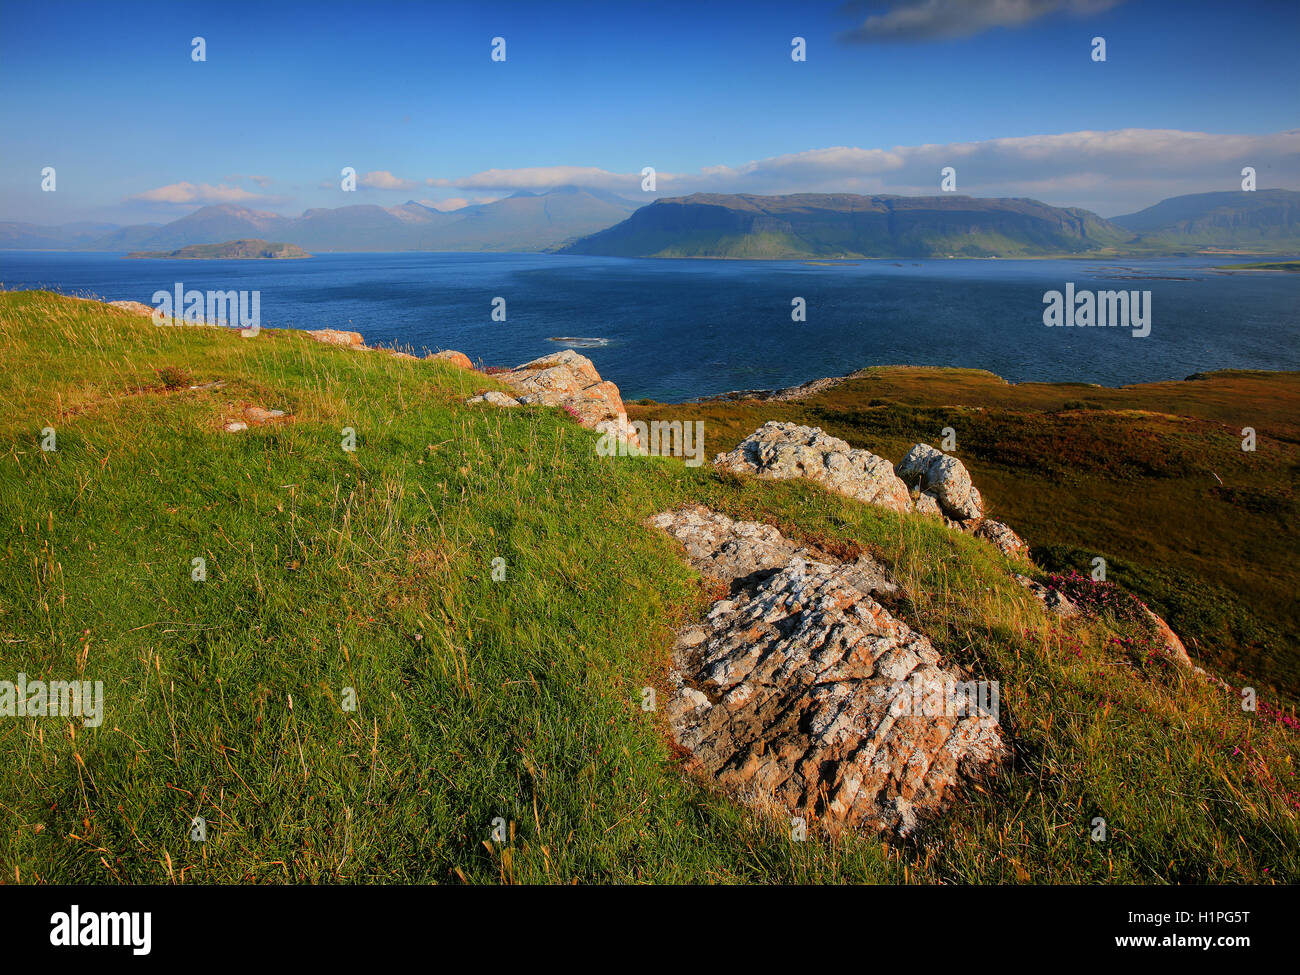 The Island of Mull from the island of Ulva, Loch Na Keal, Argyll Stock Photo